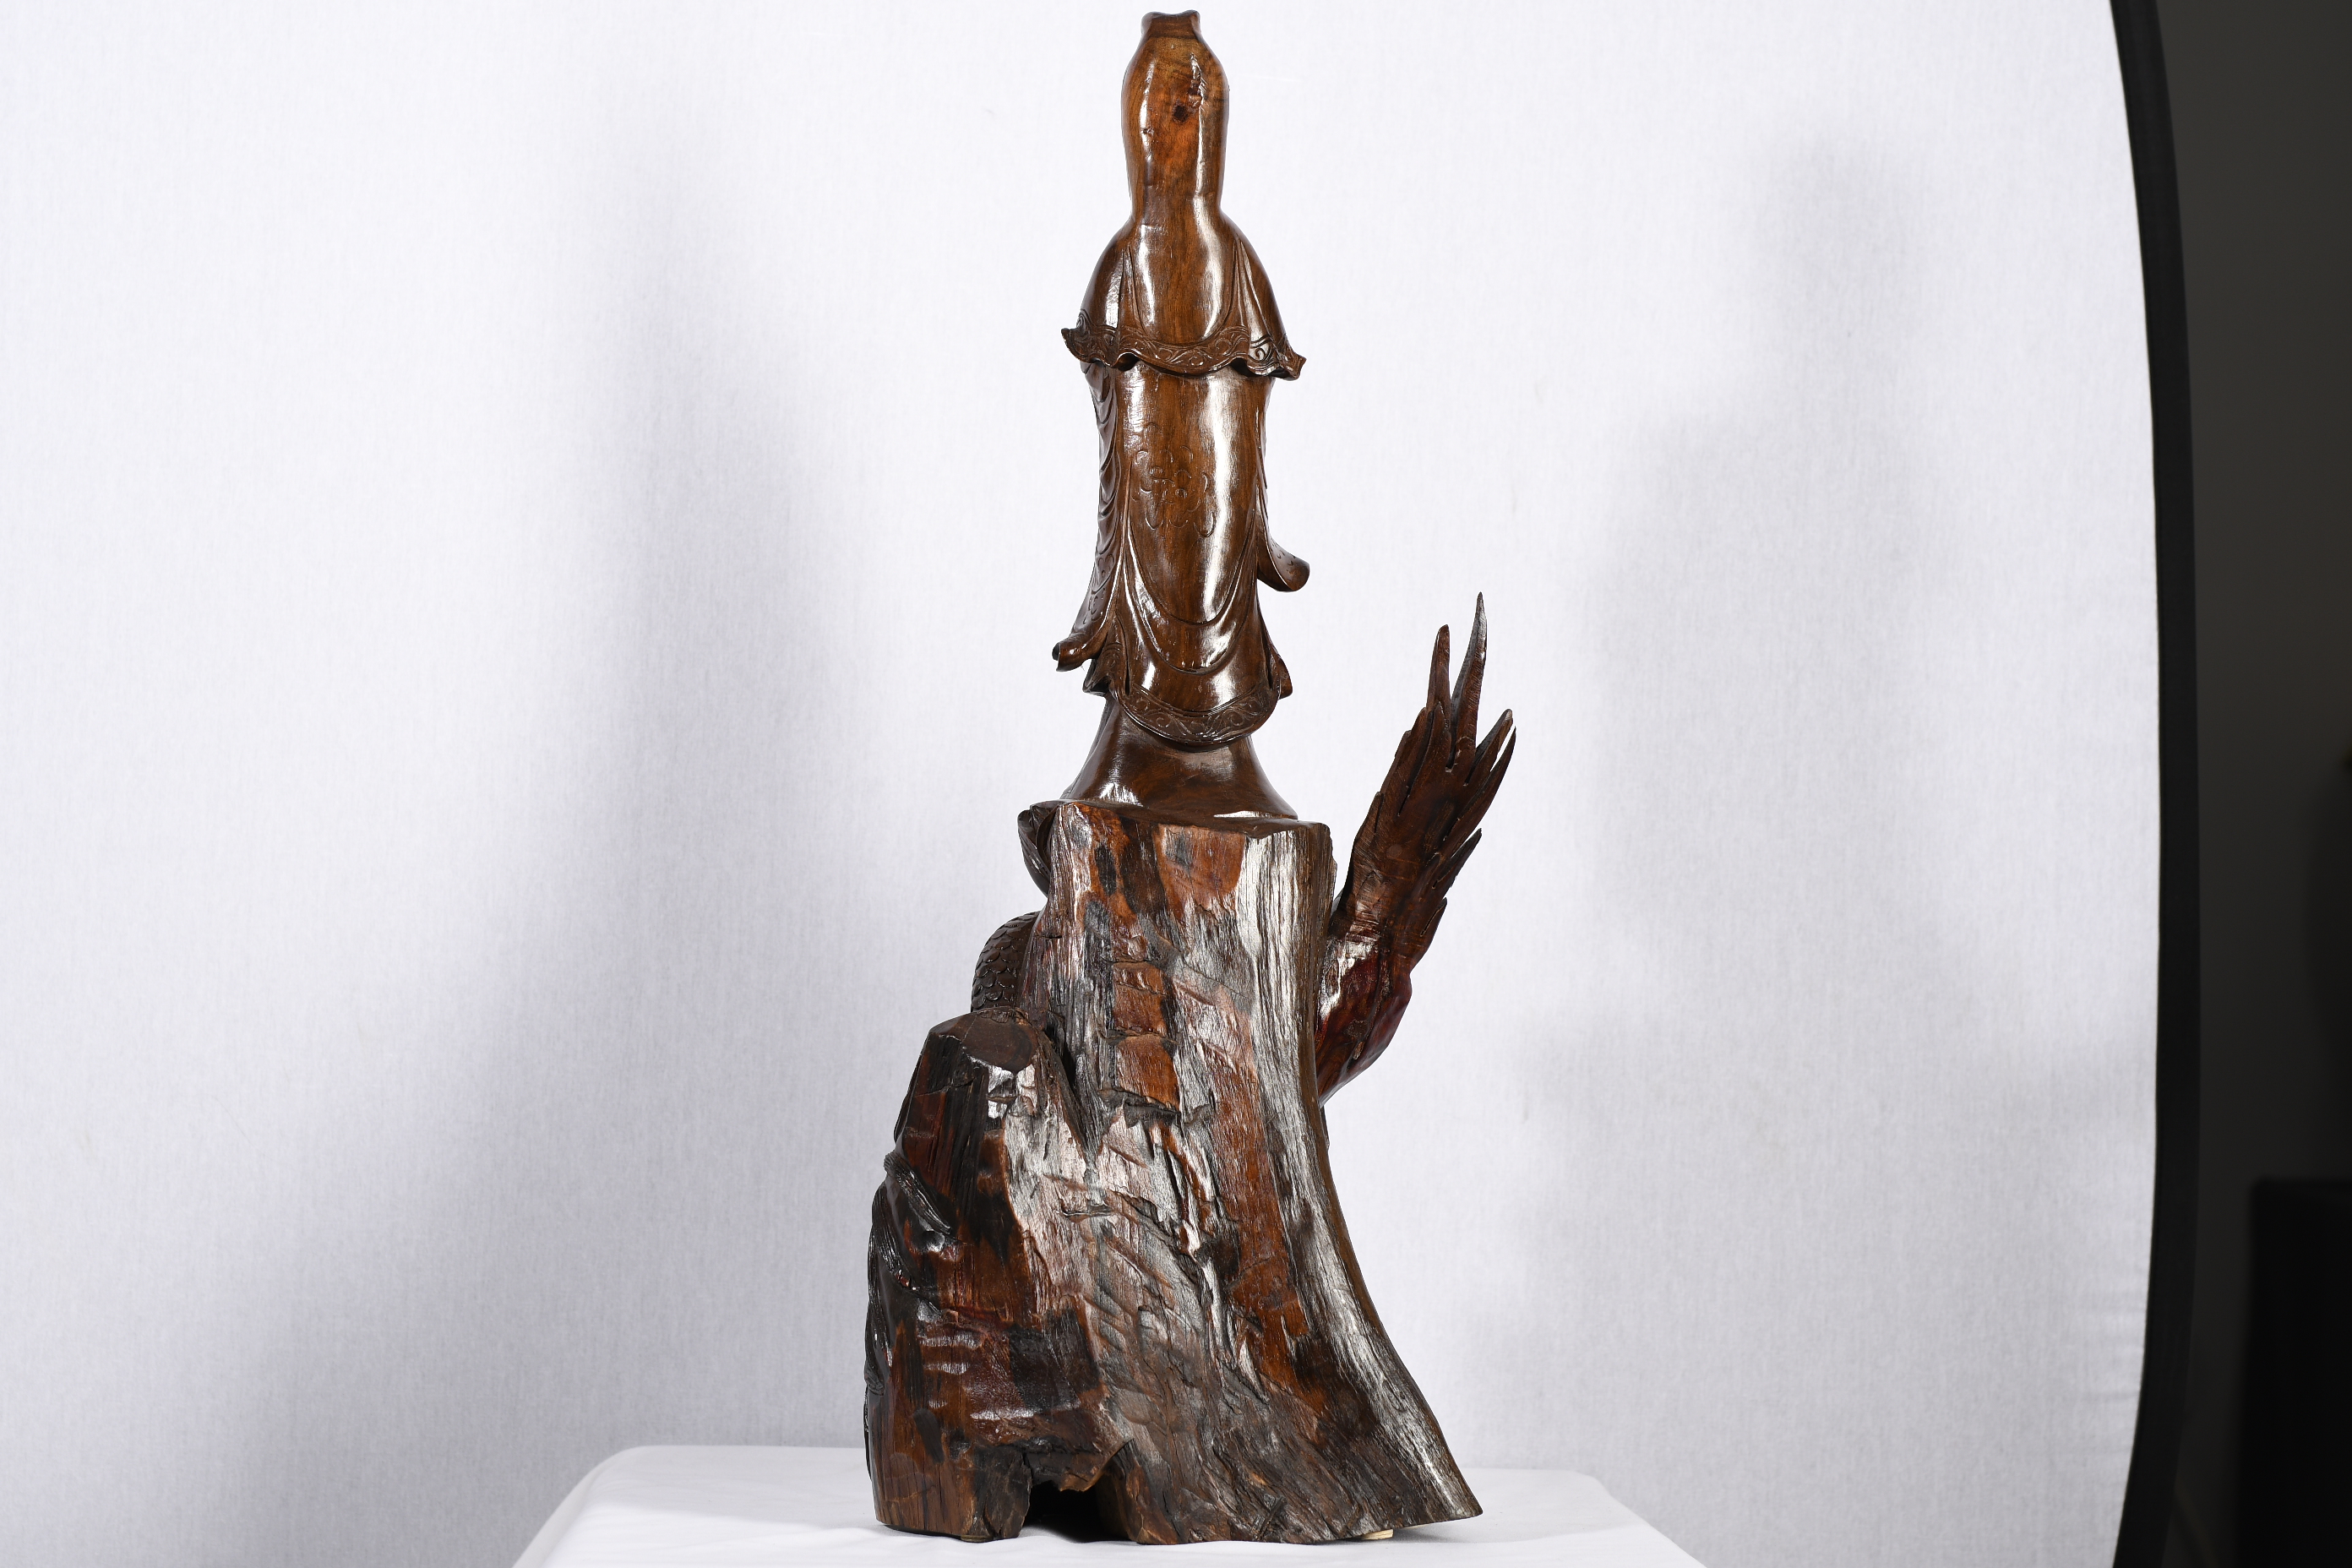 Hand Carved Wood Chinese Guan Yin Figure - Image 6 of 6